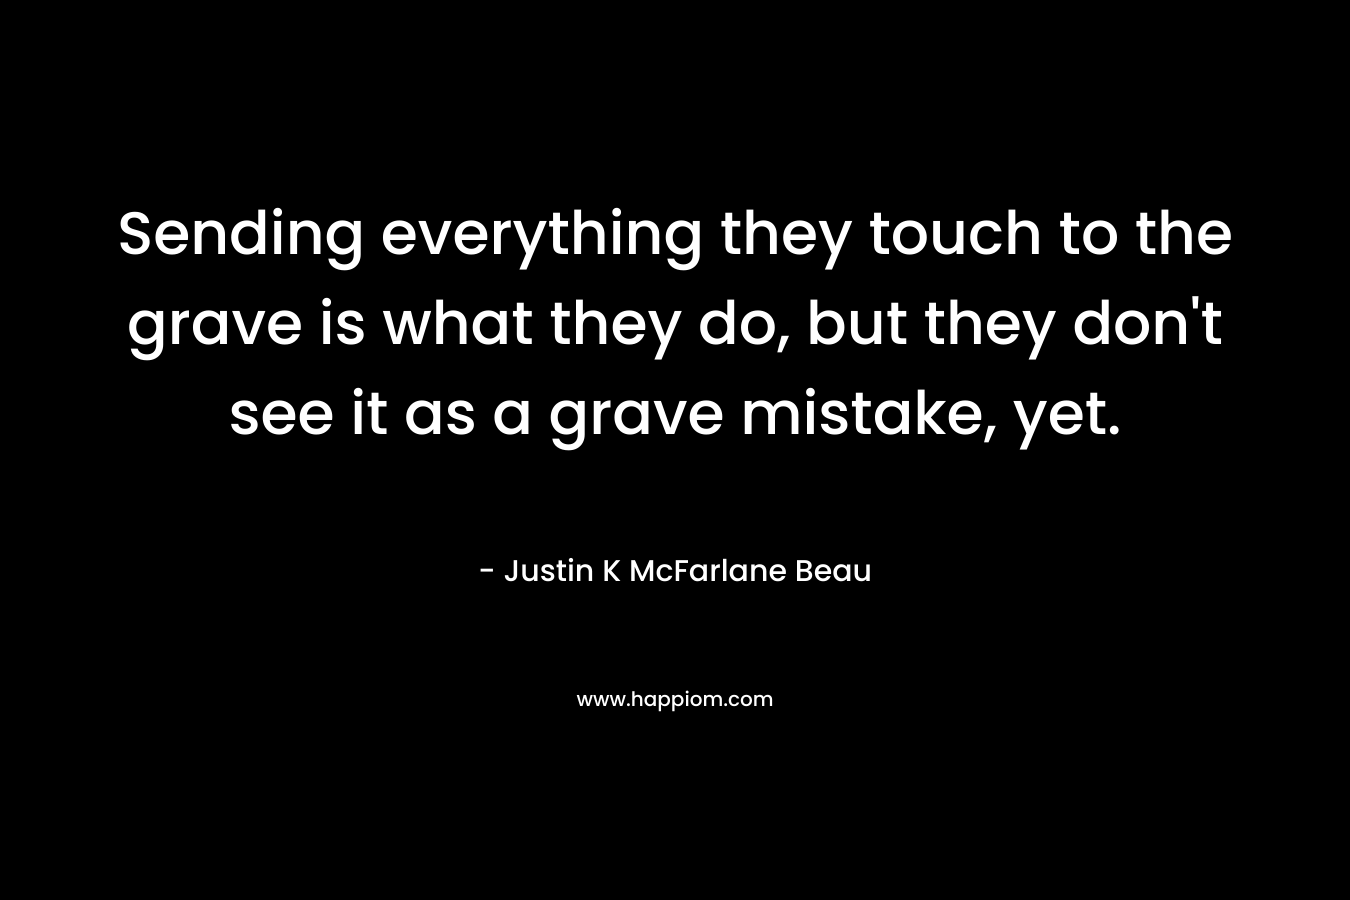 Sending everything they touch to the grave is what they do, but they don’t see it as a grave mistake, yet. – Justin K McFarlane Beau